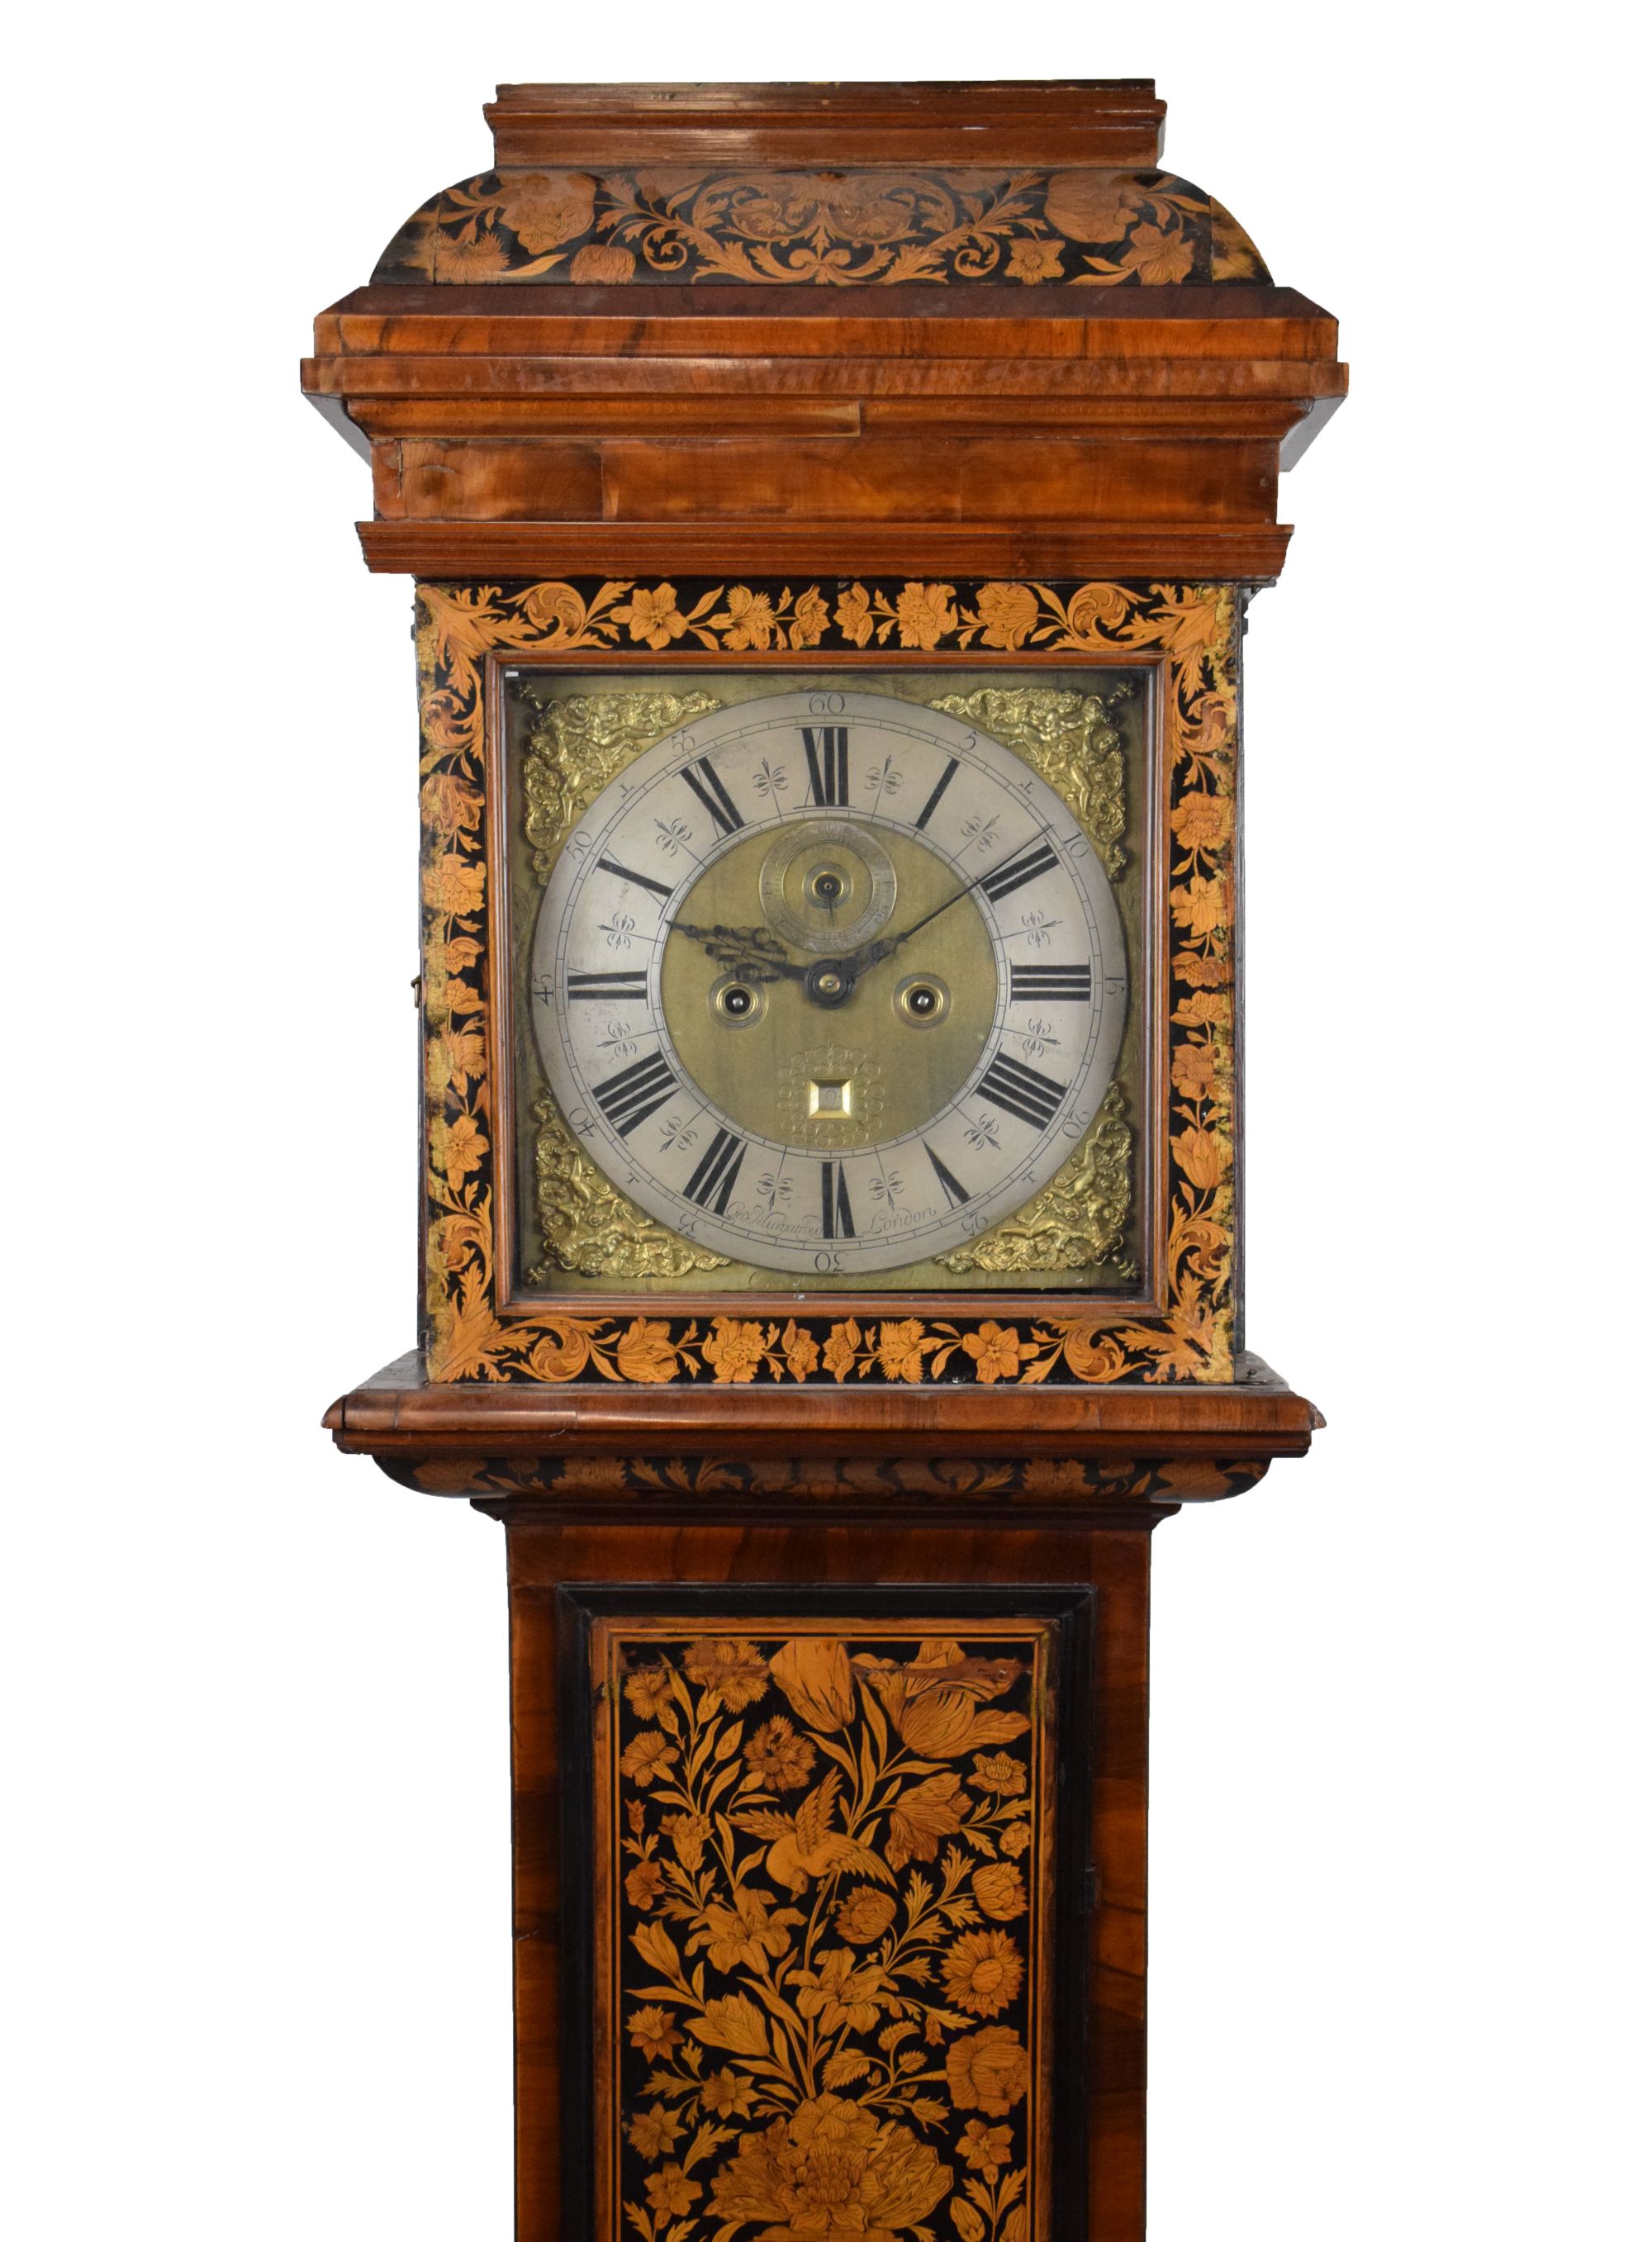 Fine walnut and marquetry 8-day longcase clock George Murgatroyd, London, circa 1700 Sold for £5,800